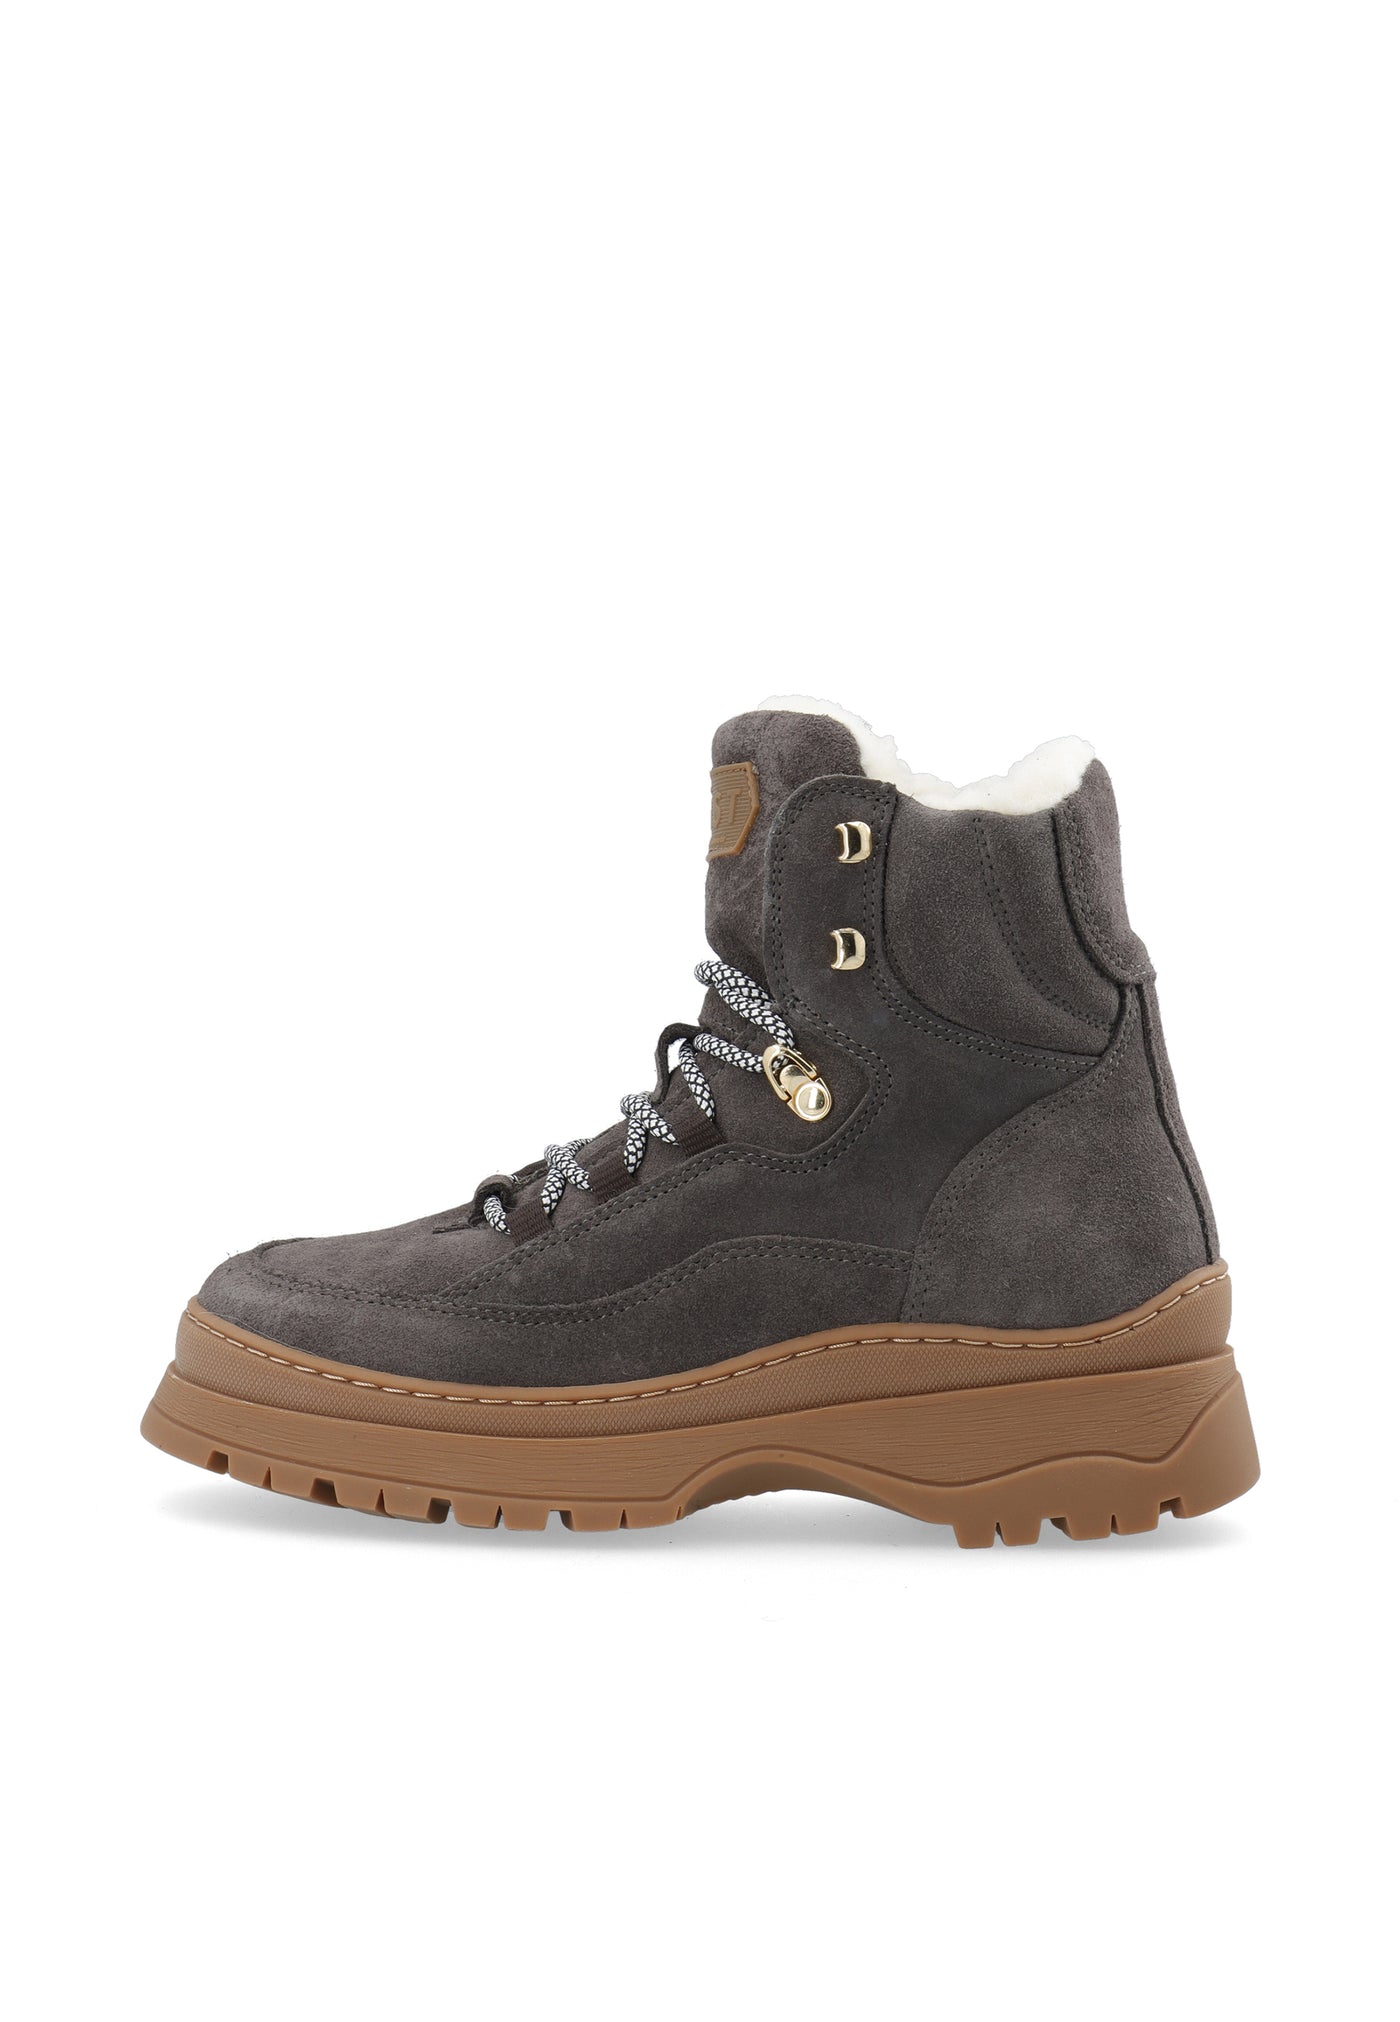 LÄST Downhill Lace-Up Boot Ankle Boots Dark Grey